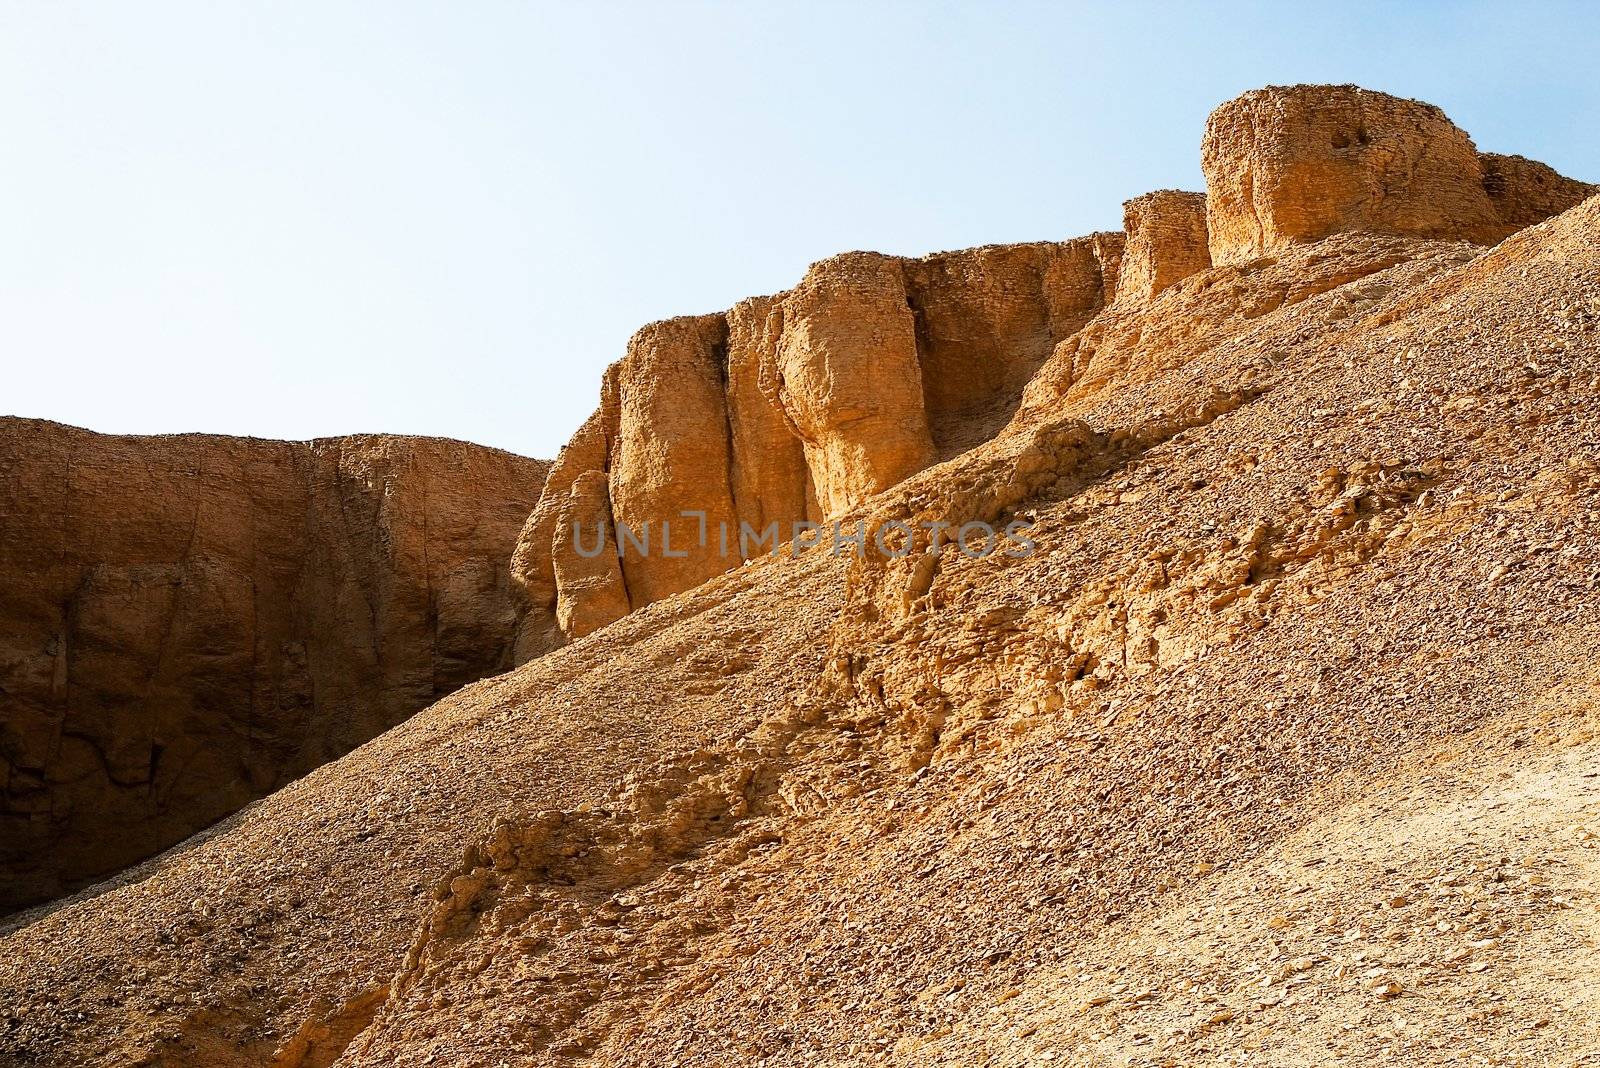  Valley of the Kings - Luxor (Thebes) - Upper Egypt